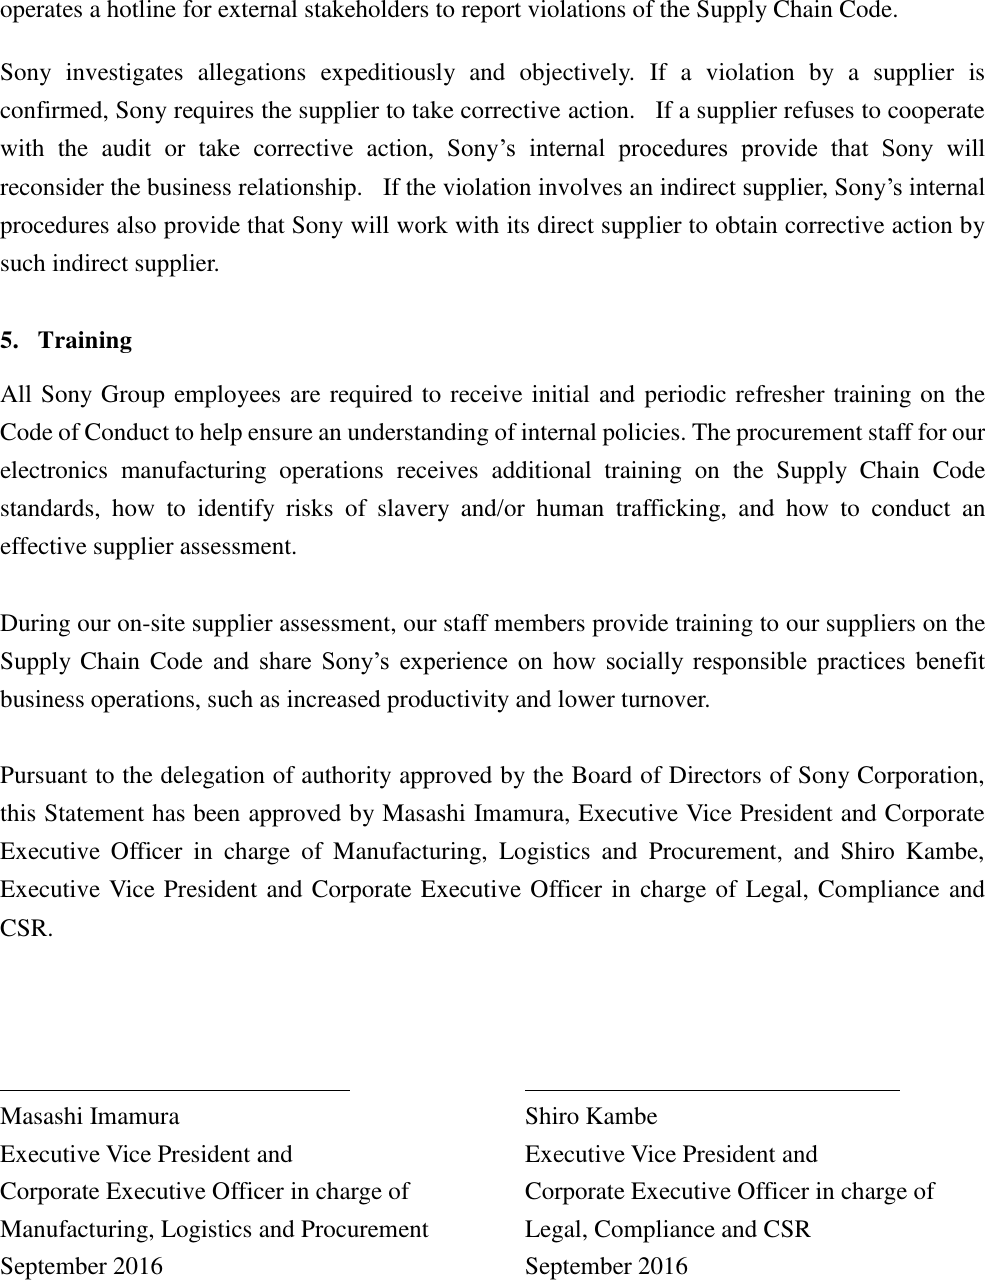 Page 5 of 5 - UKMSA 20160908 Sign R